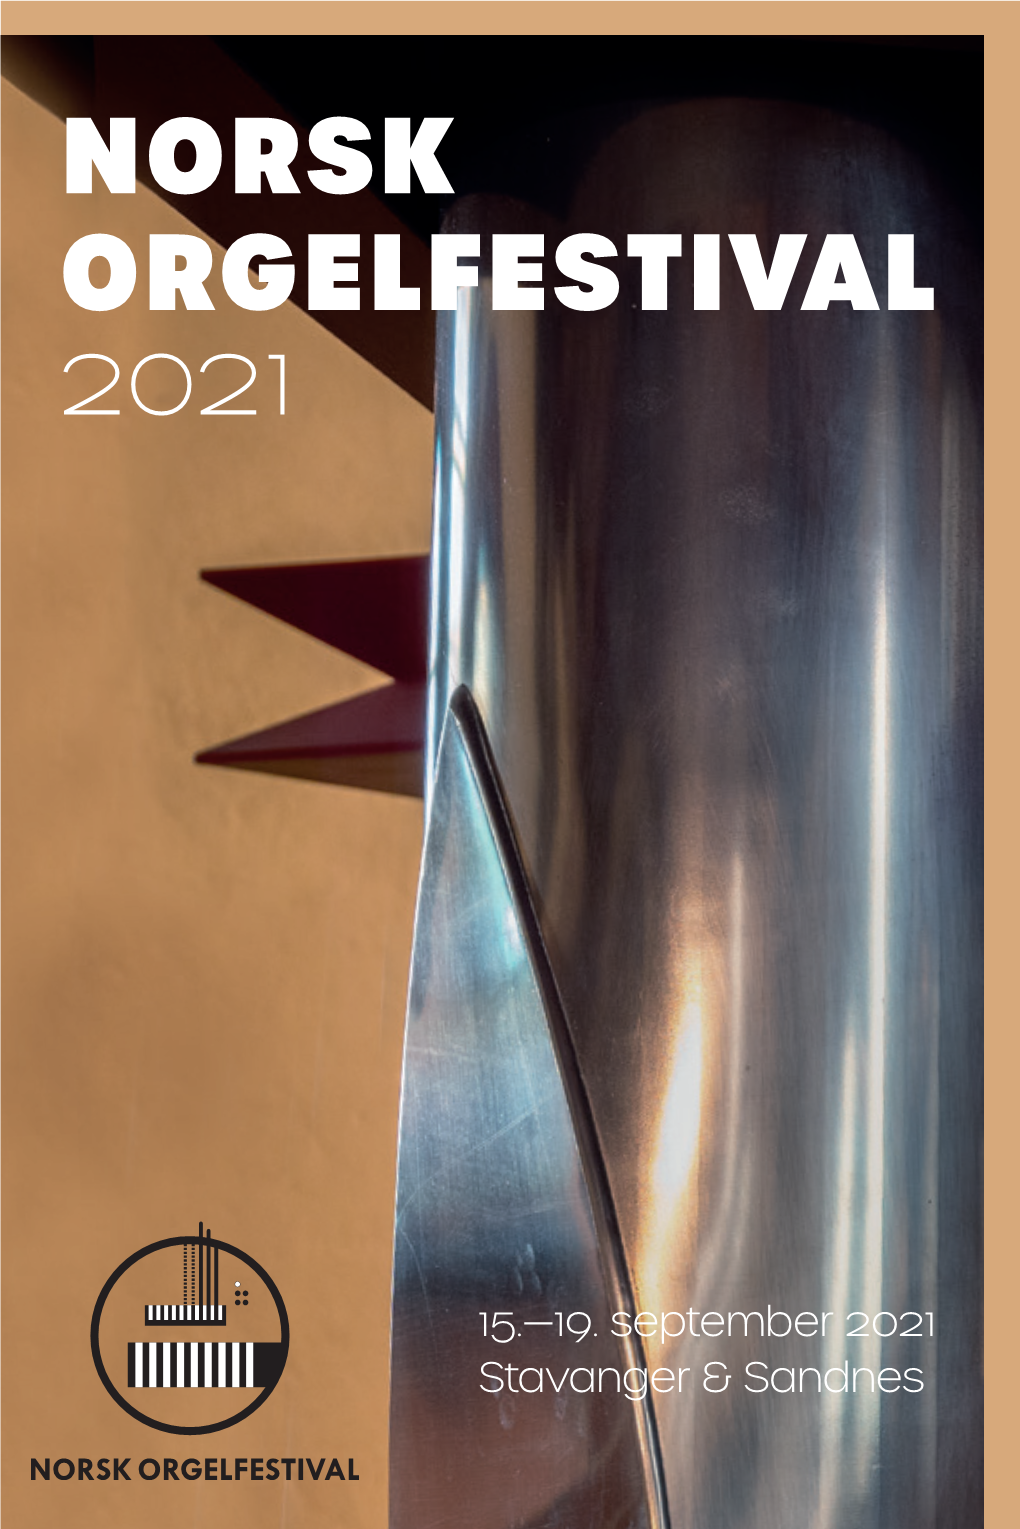 Norsk Orgelfestival 2021